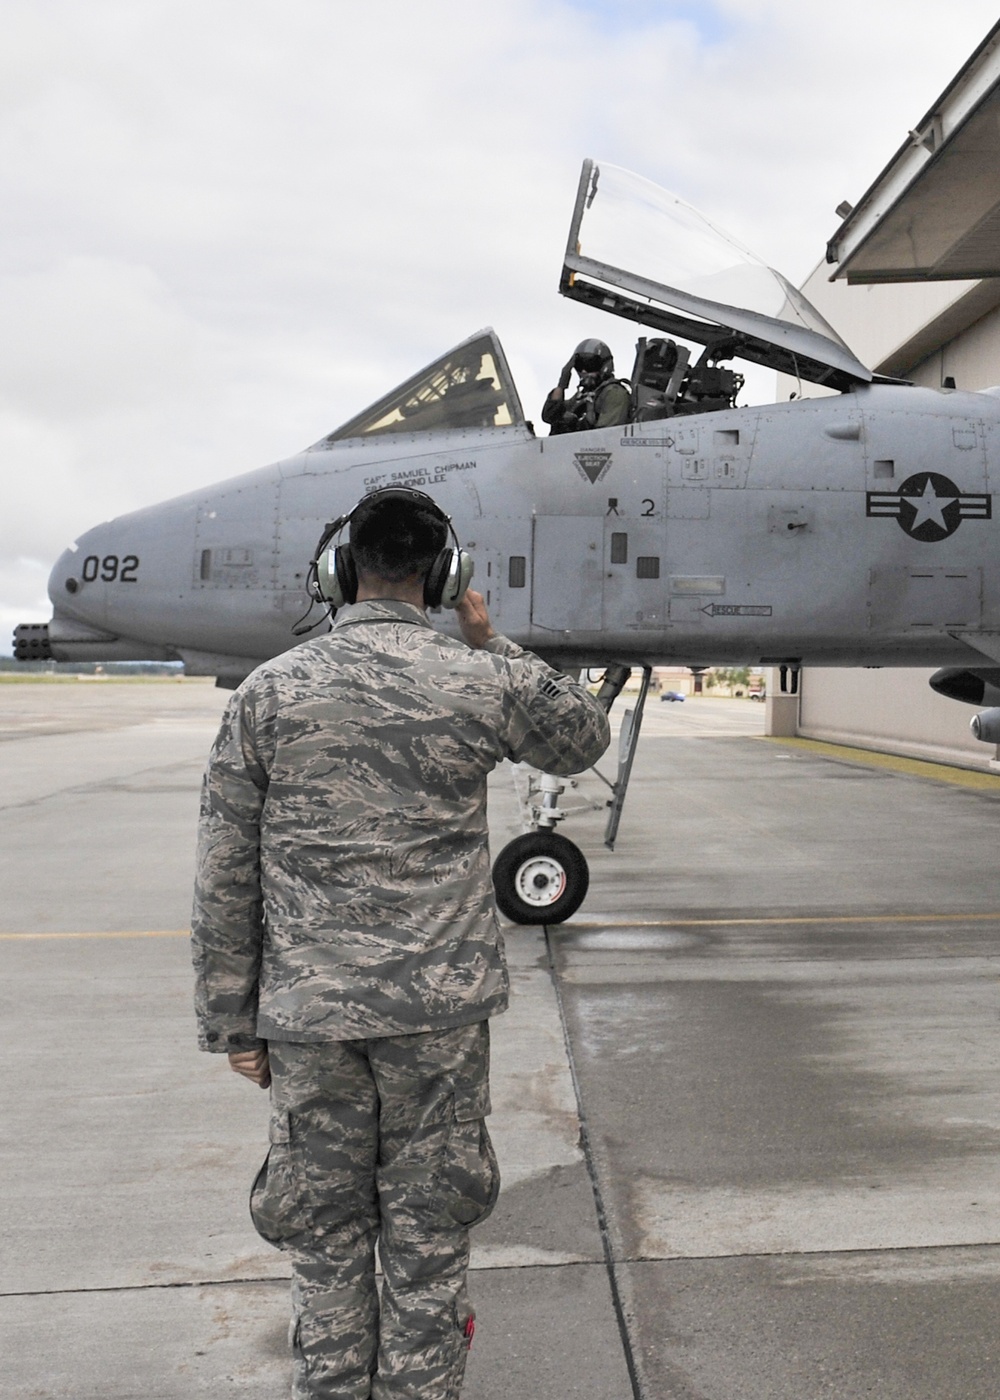 A-10 operations ramp up